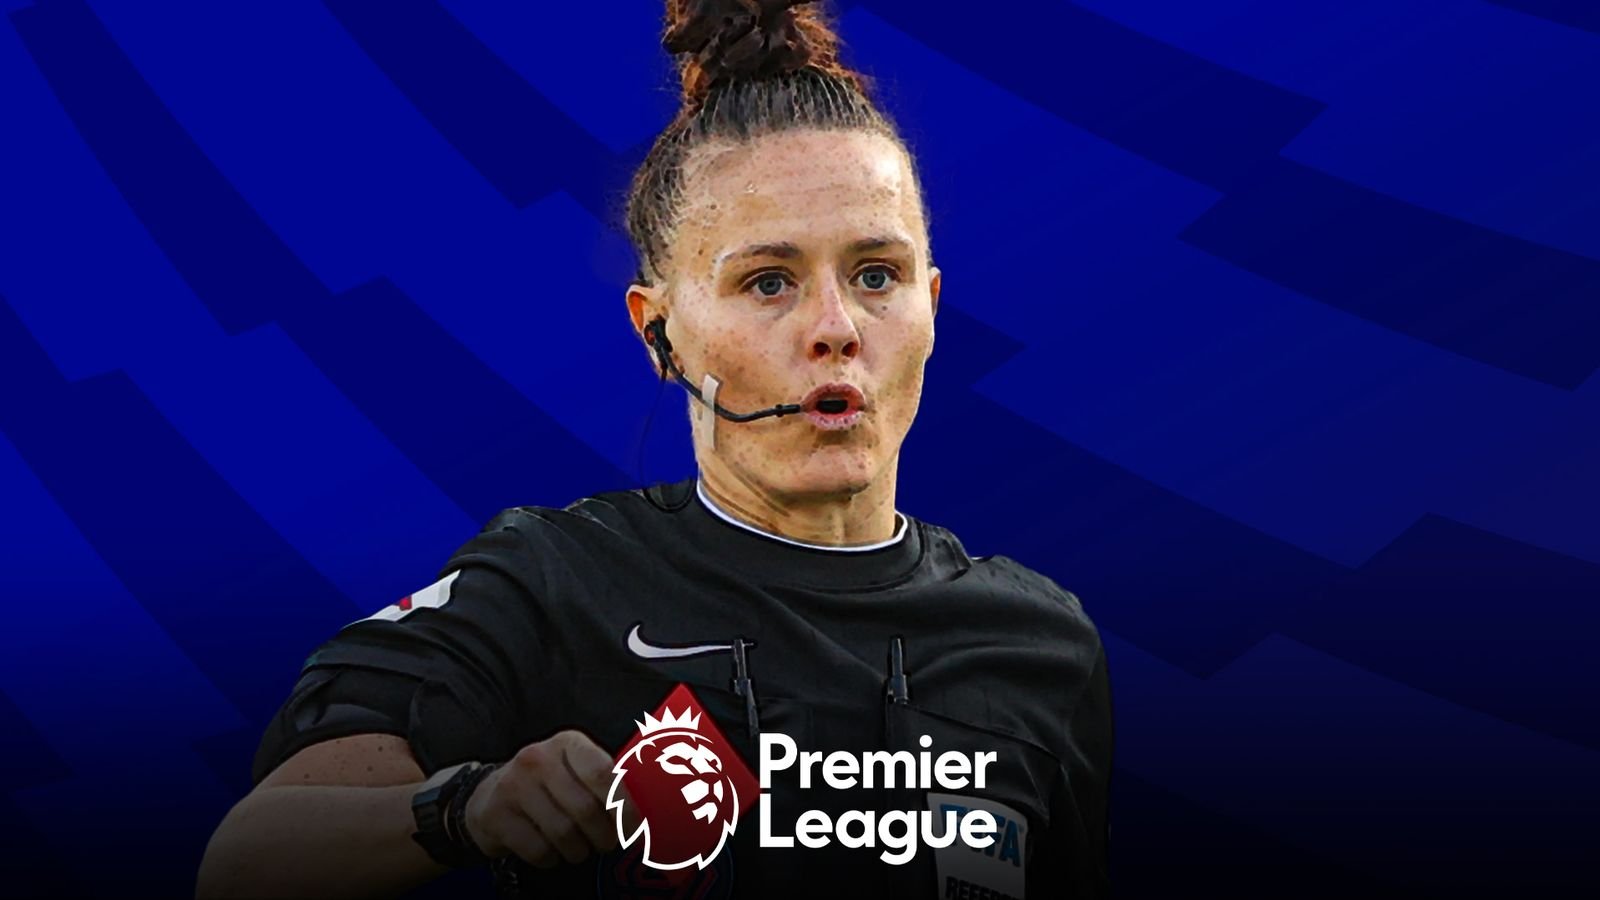 Rebecca Welch to become first woman Premier League referee by officiating Fulham vs Burnley | Football News